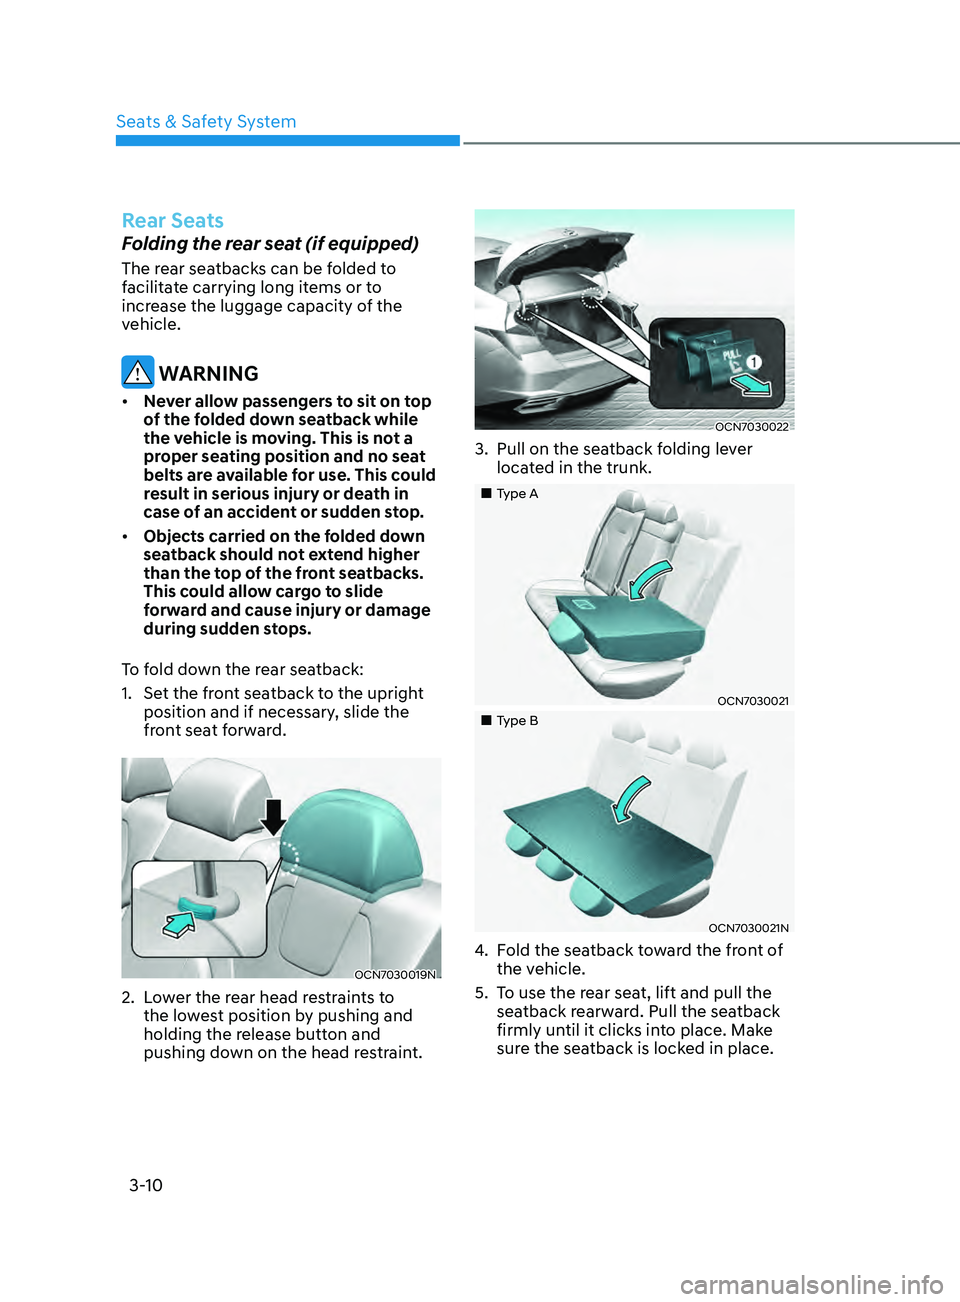 HYUNDAI ELANTRA SEL 2021  Owners Manual 3-10
Rear Seats
Folding the rear seat (if equipped)
The rear seatbacks can be folded to 
facilitate carrying long items or to 
increase the luggage capacity of the 
vehicle.
 WARNING
•	Never allow p